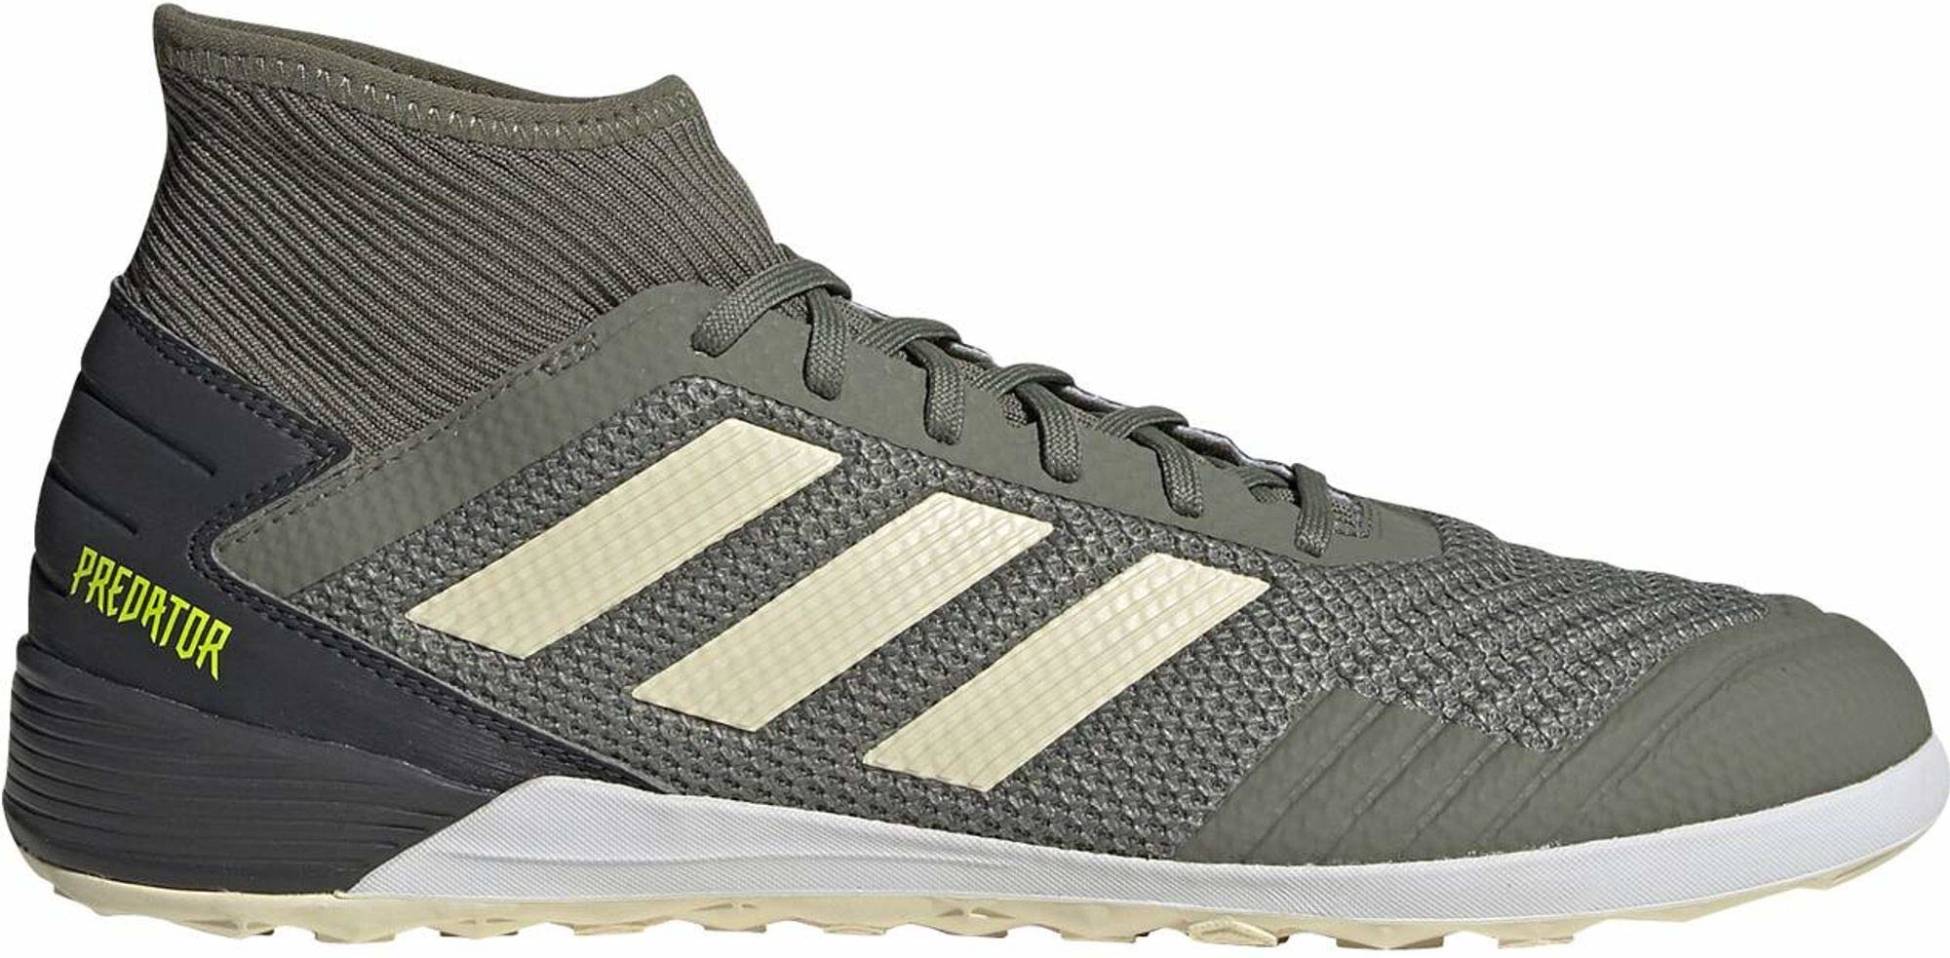 Save 48% on Adidas Tango Soccer Cleats 